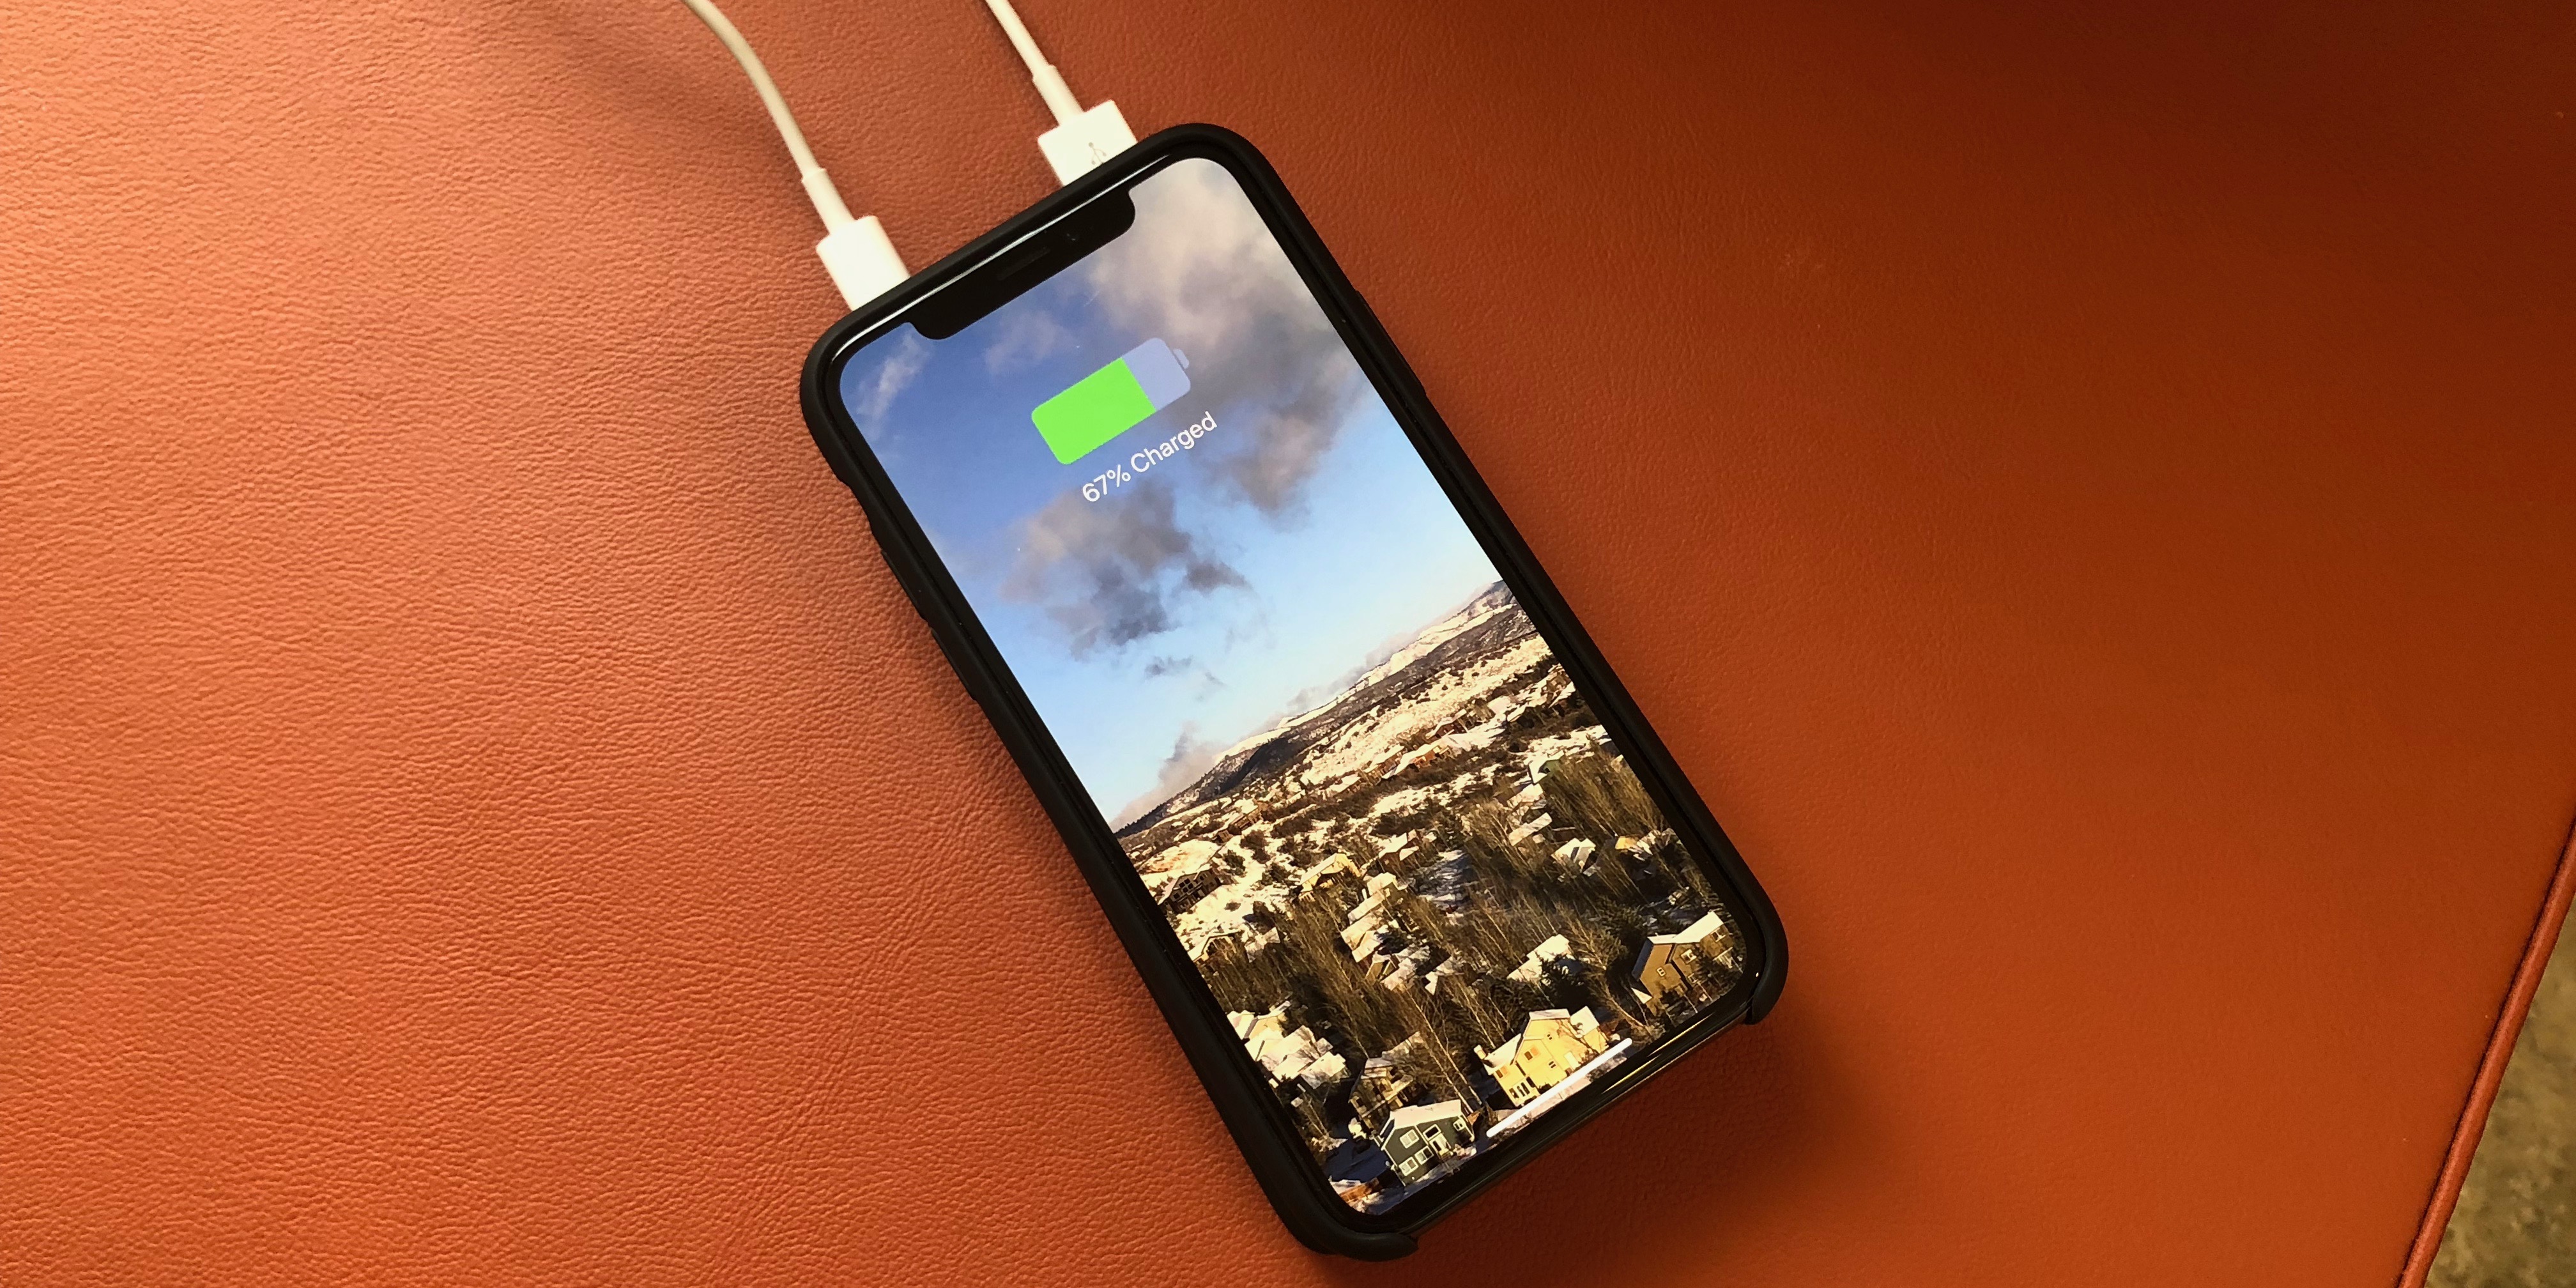 Ugreen's Power Bank with USB-C and wireless charging impresses